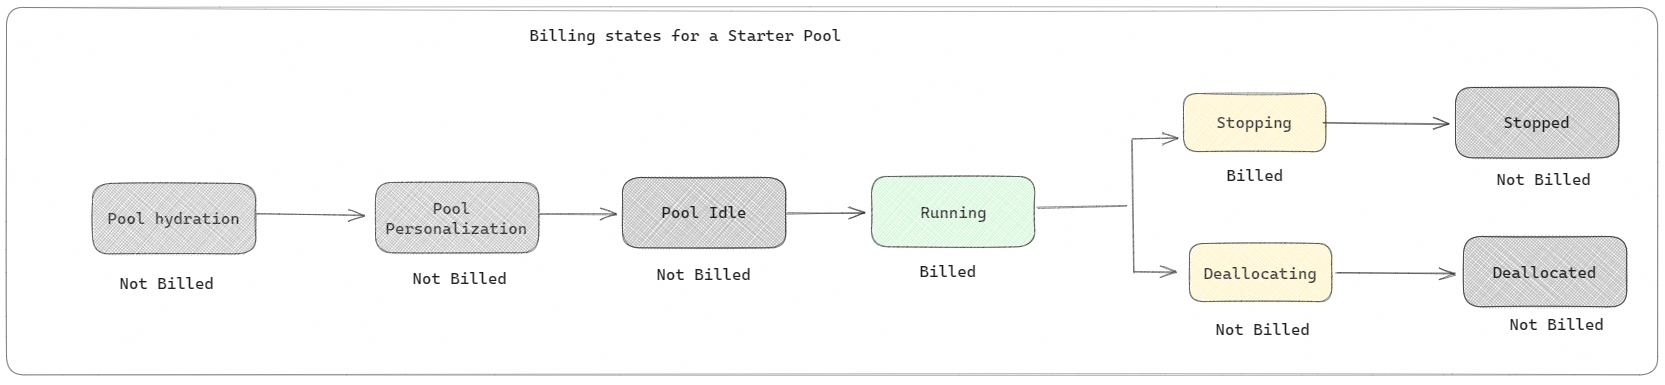 Diagram showing the high-level stages in billing of starter pools.